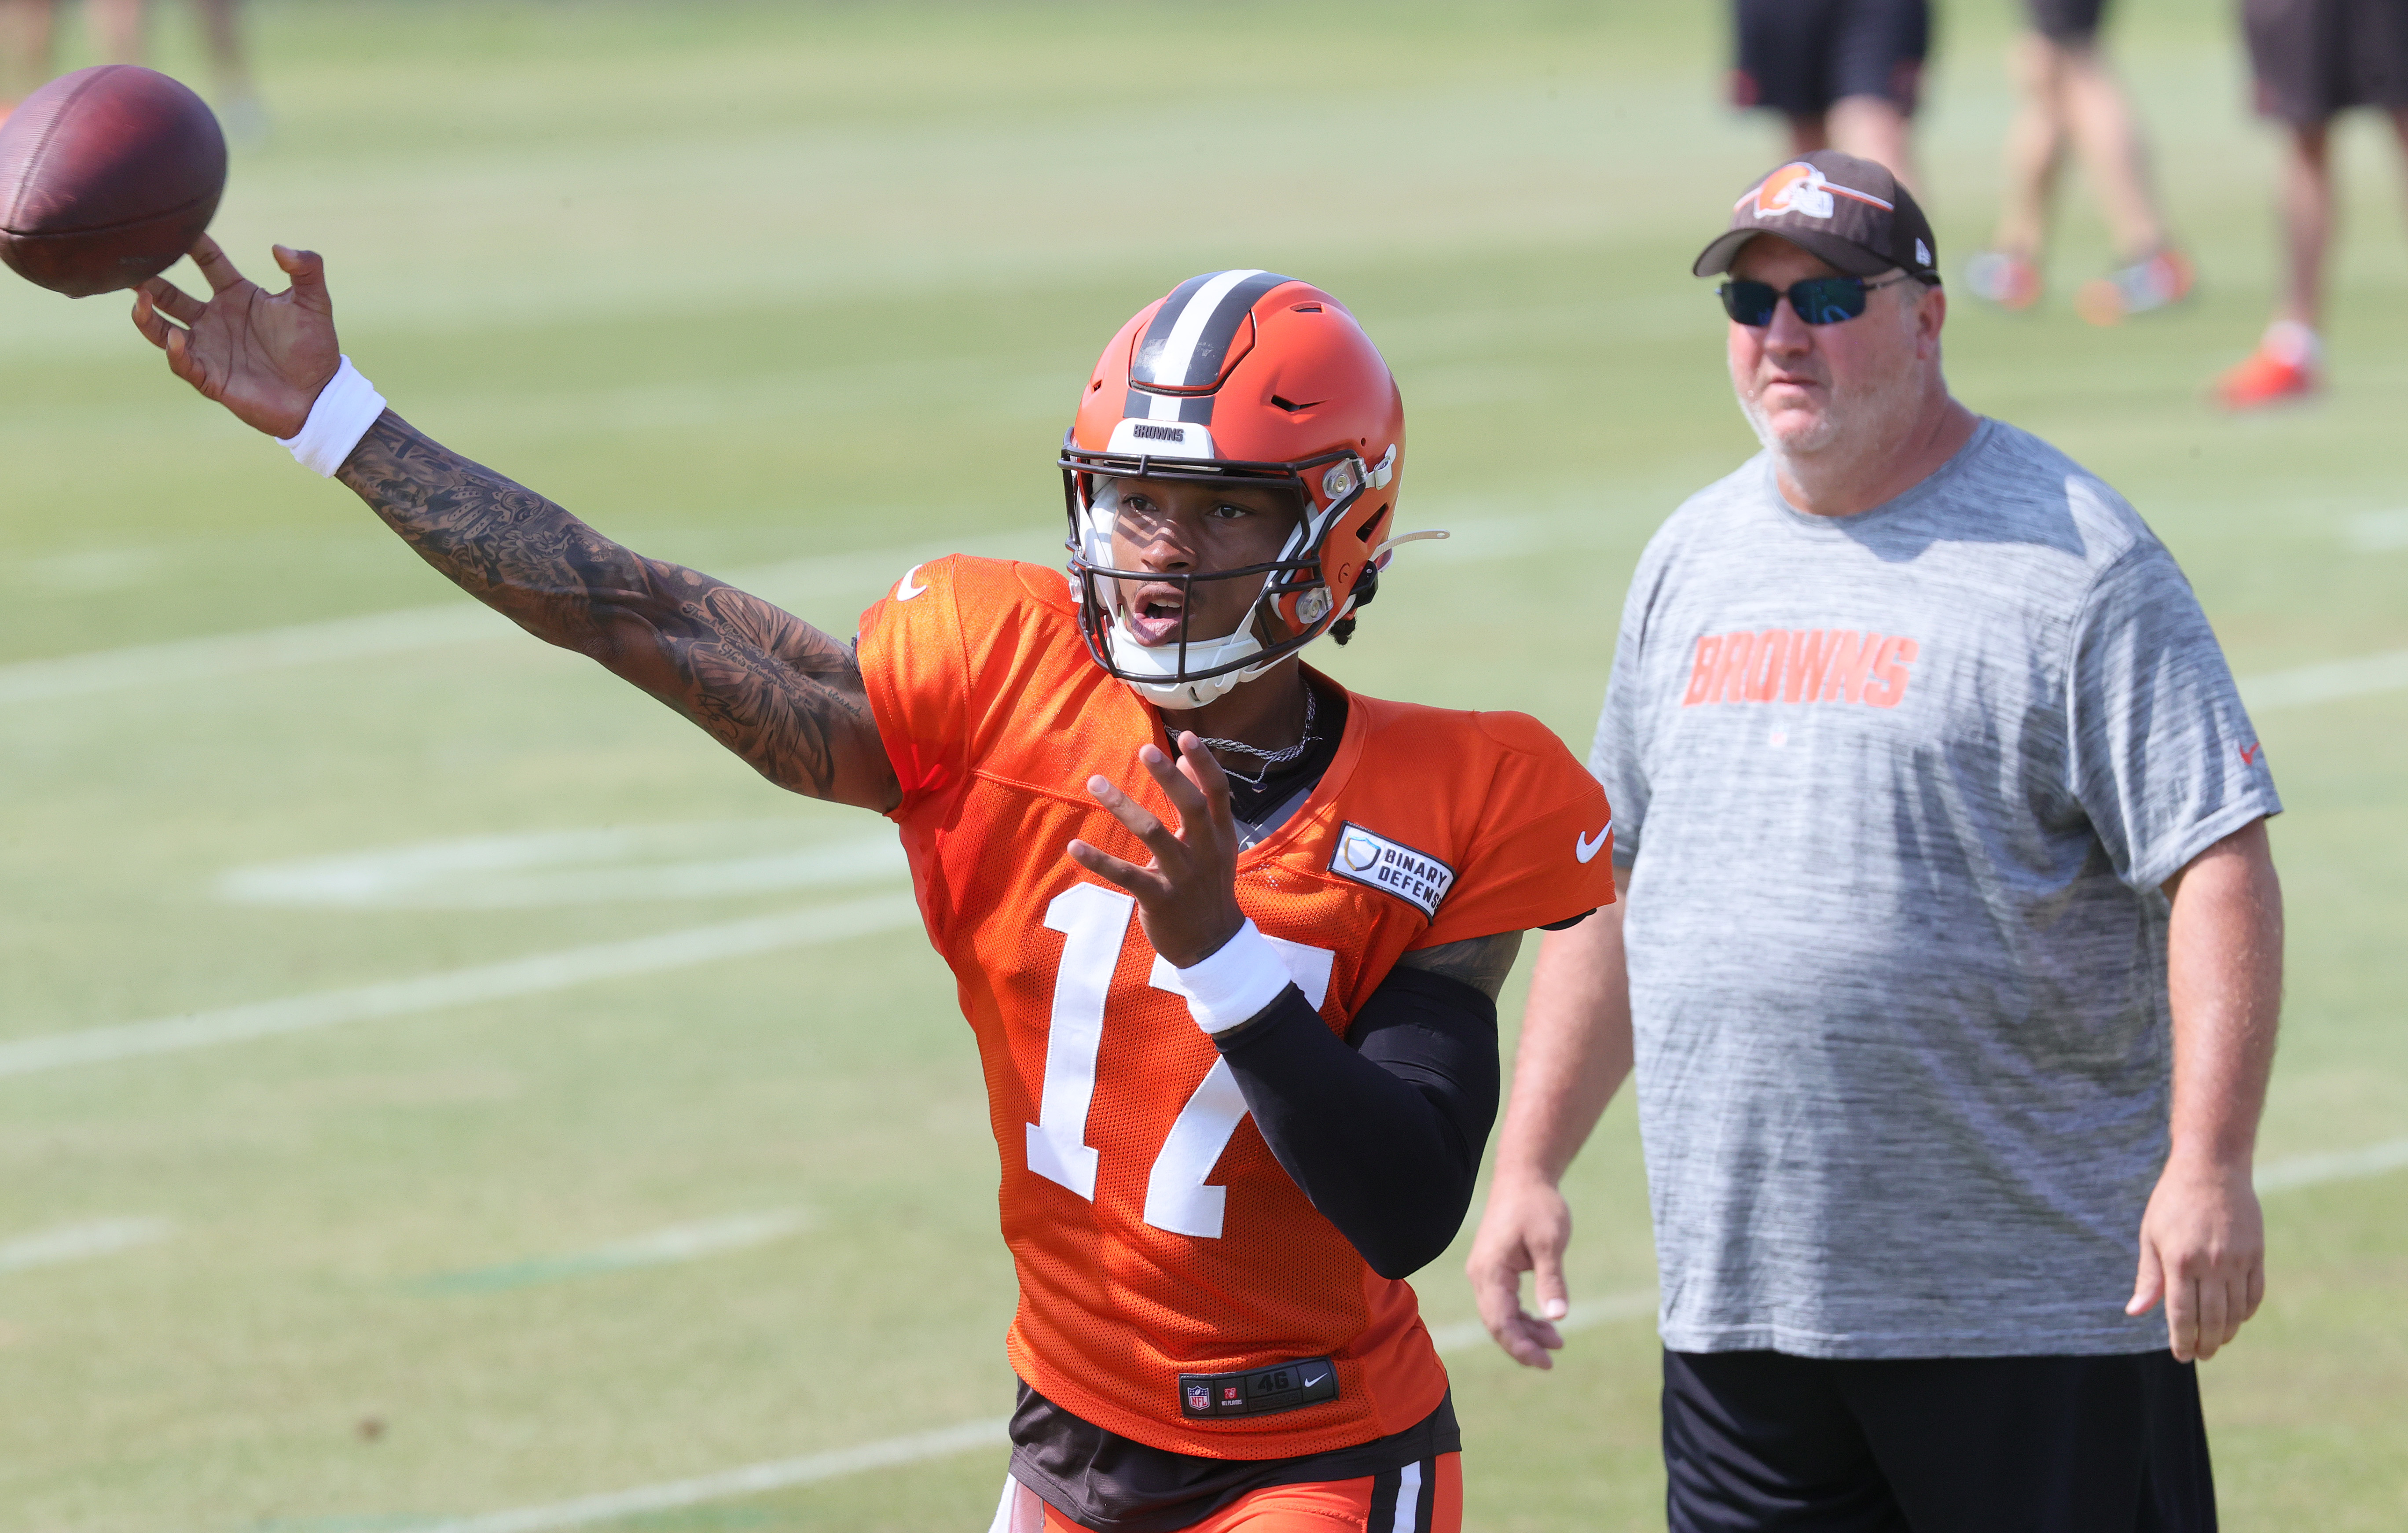 Browns rookie QB Thompson-Robinson shows poise, potential in NFL debut